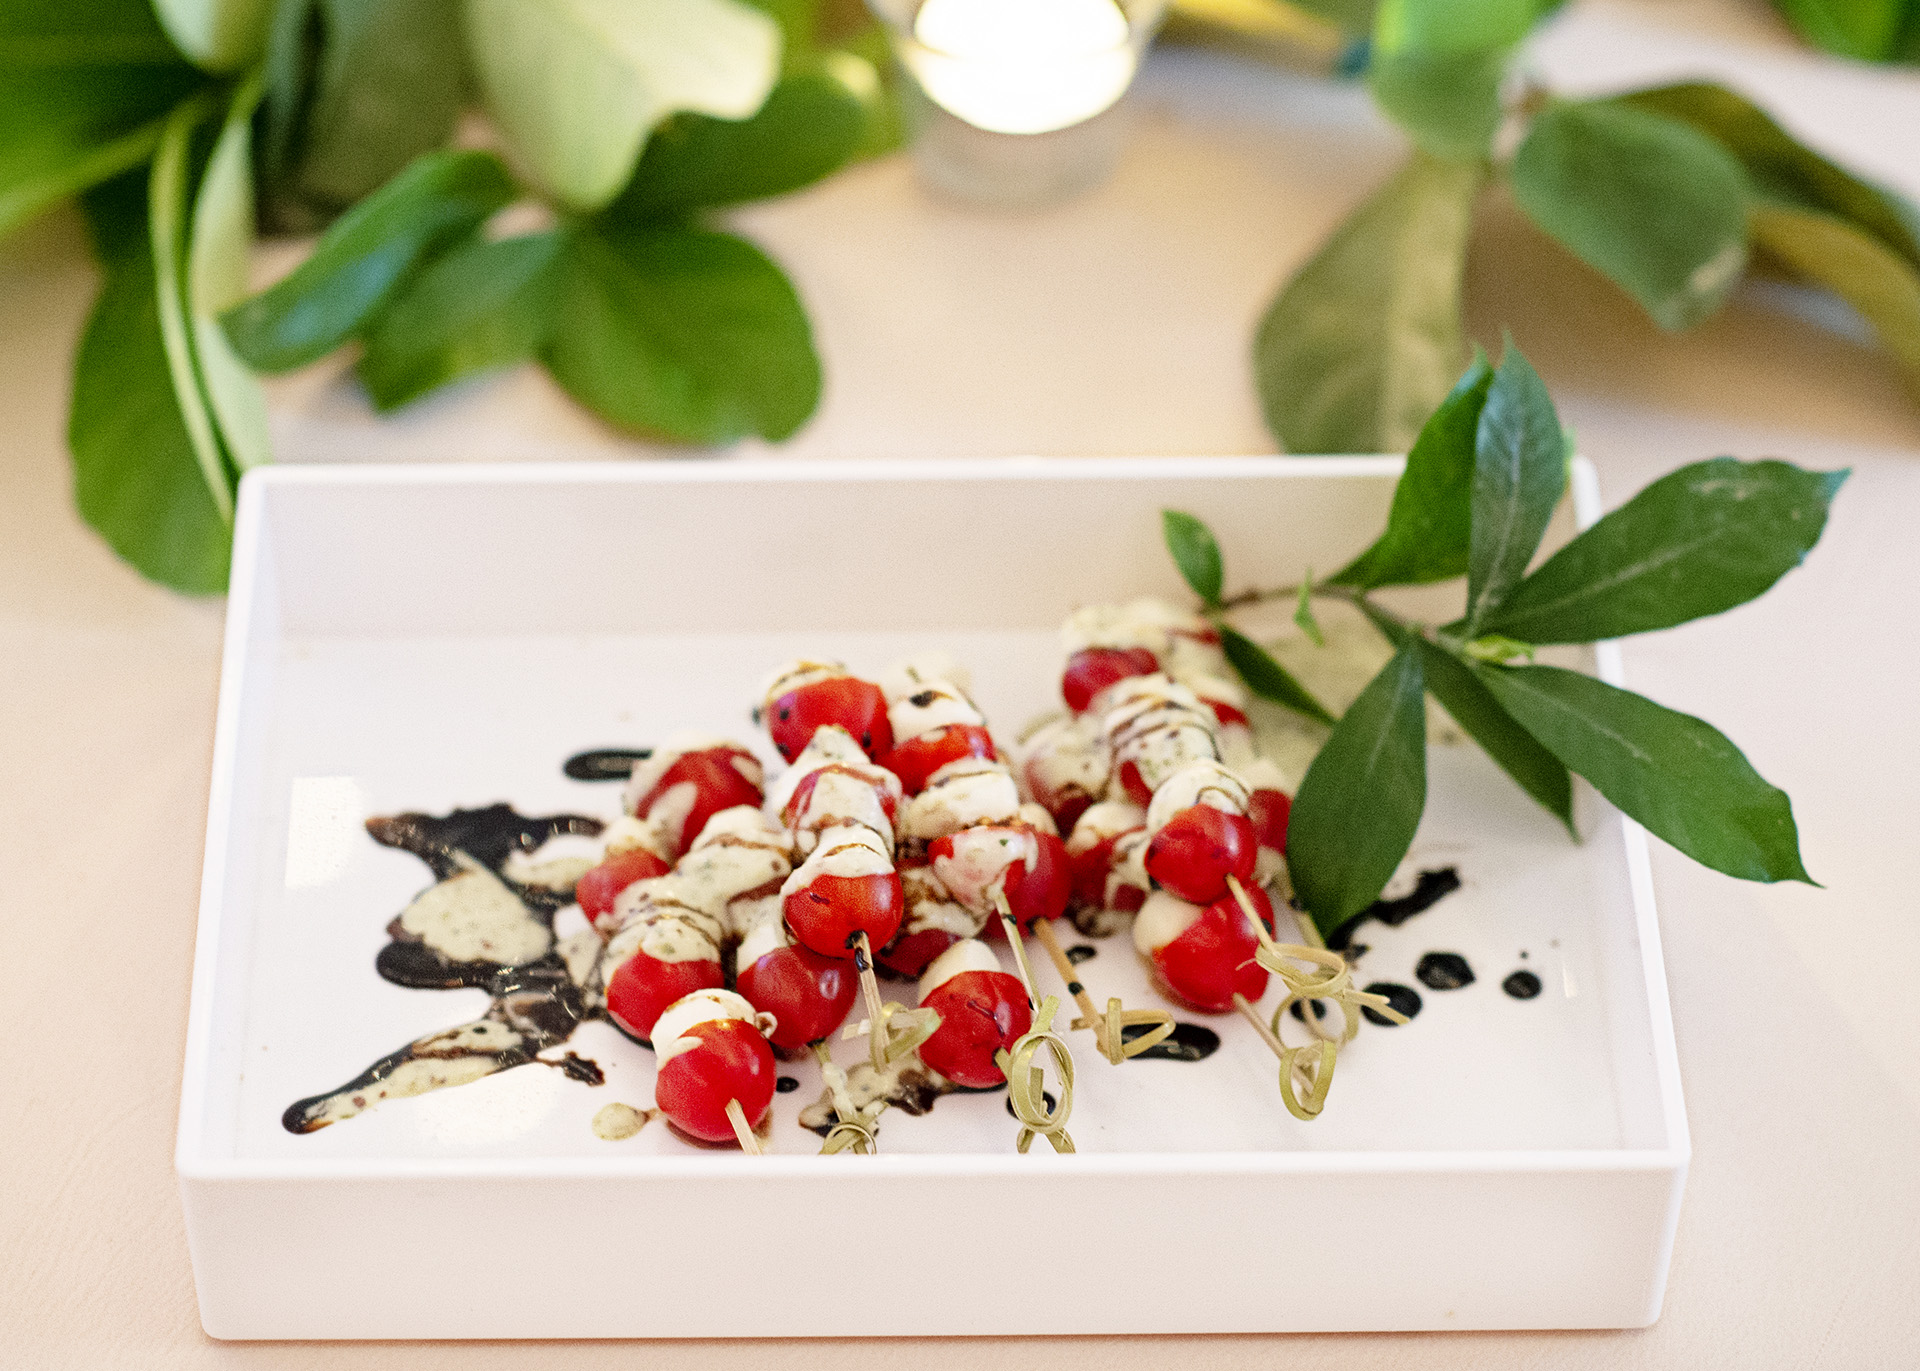 Caprese salad wands on a small tray with greenery garnish